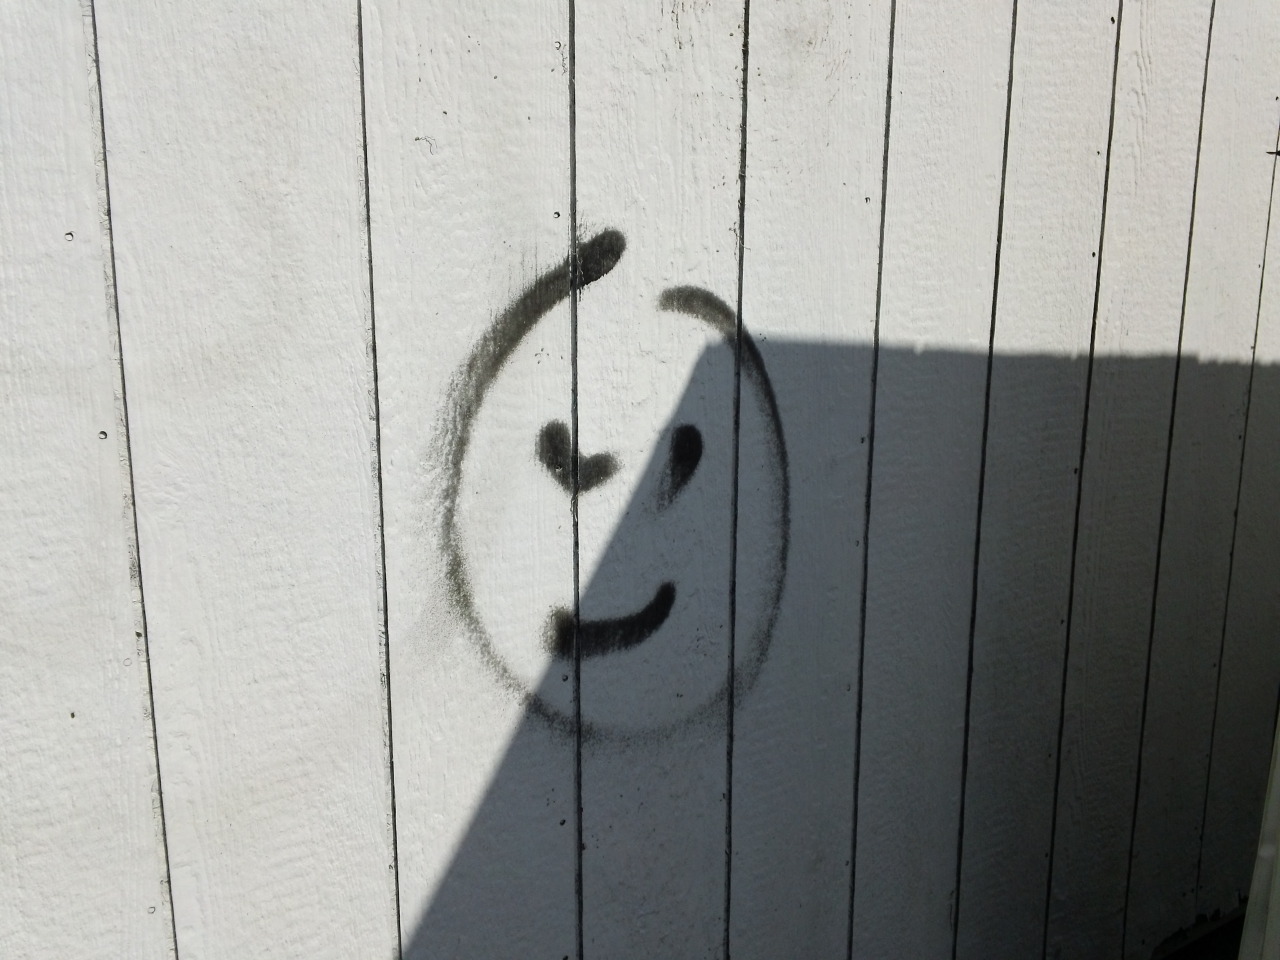 #Photography #Sept. 2017 #Outdoors#Shadows#Sheds#Graffiti#Sprayed Paint#Street Art#Smile#Smilie#Cracks#Walls#Siding#Sunlight#Scratches#Dirt#My Snaps#My Photos#My Photography